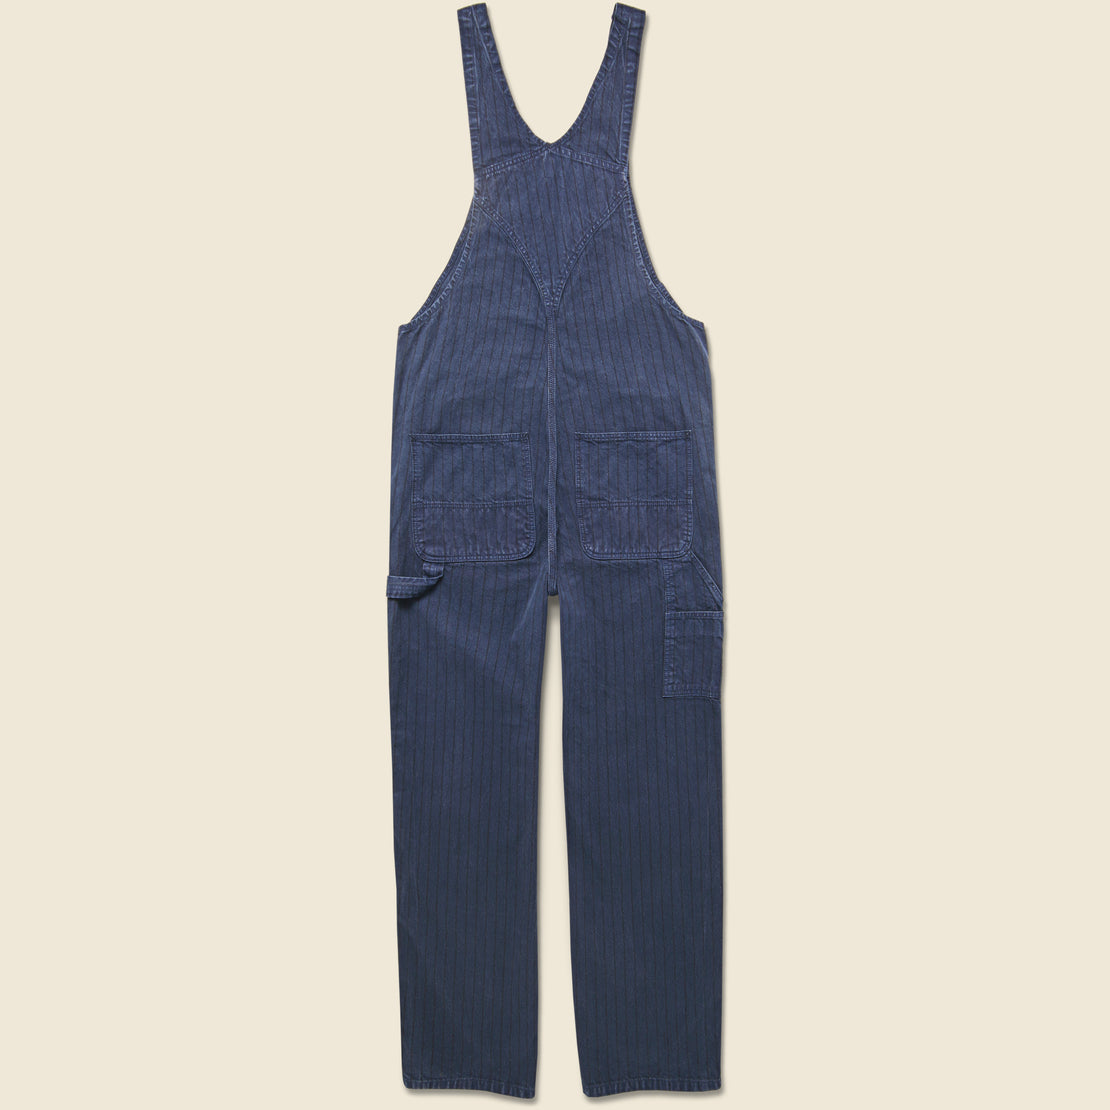 Trade Stripe Overall - Mizar/Black - Carhartt WIP - STAG Provisions - Pants - Jumpsuit